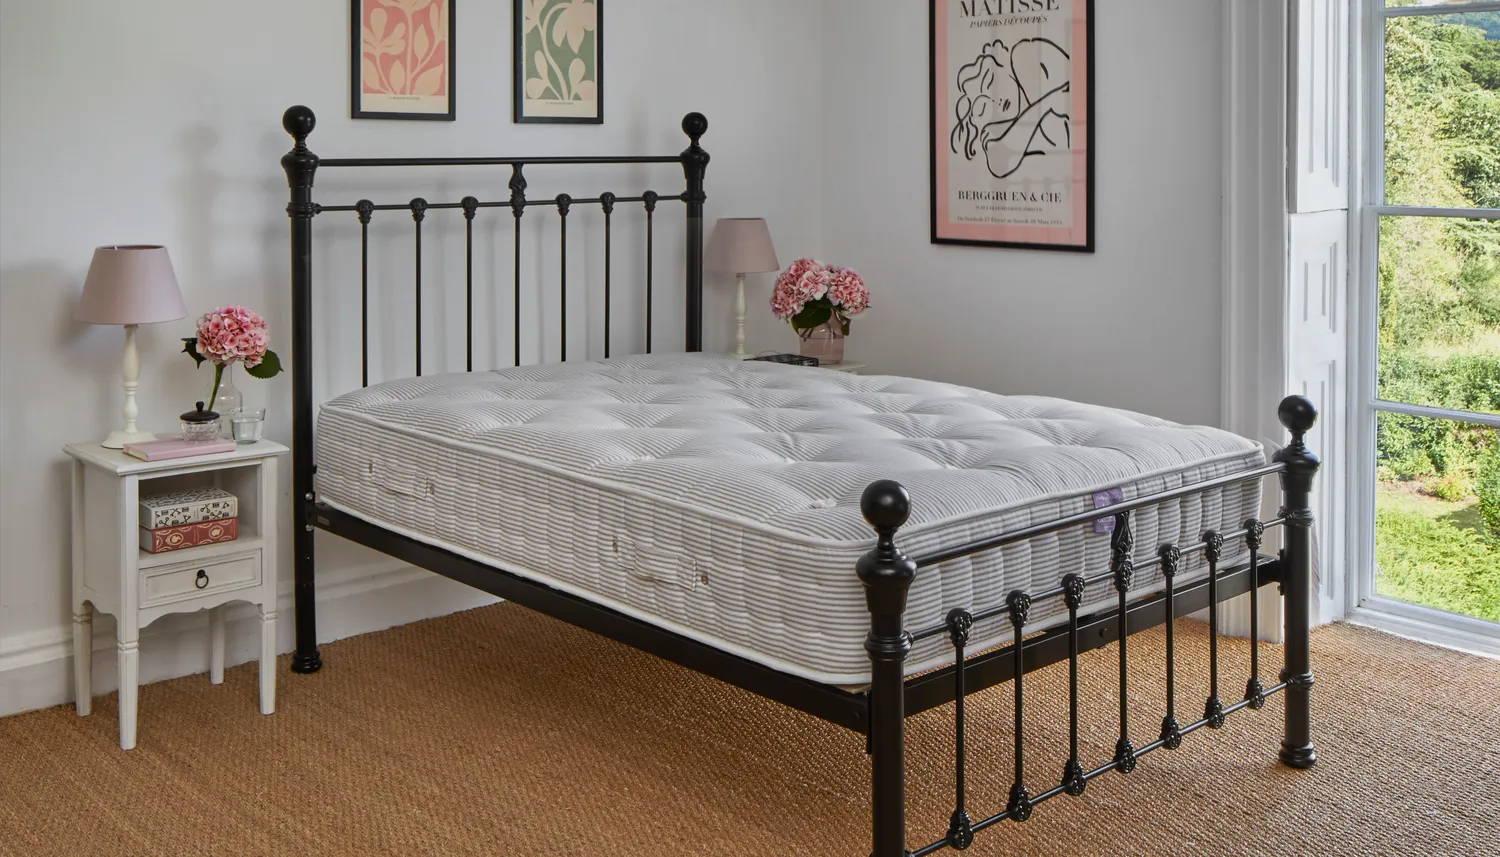 Pocket sprung mattresses by The Original Bed Co